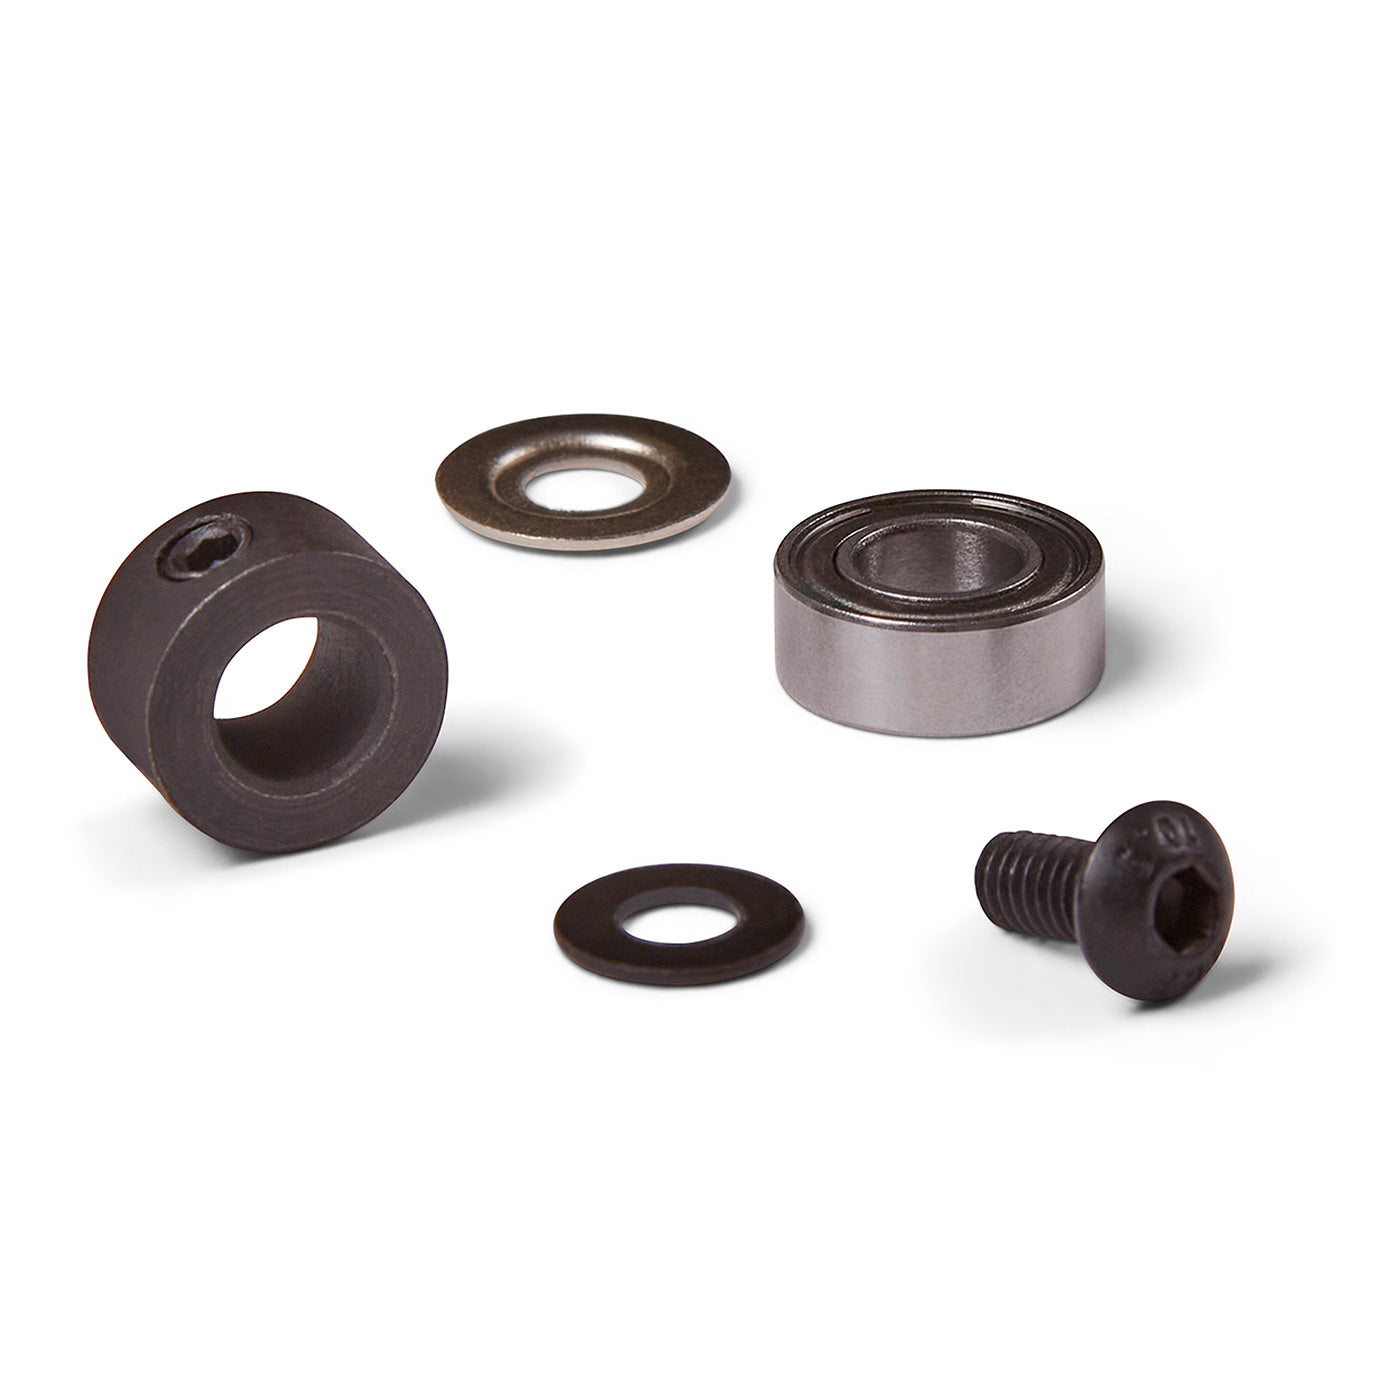 Bearing Kit for R5662, R5663, R5664, R5665, R5666, R5667, R5668, R5669 and R5670  